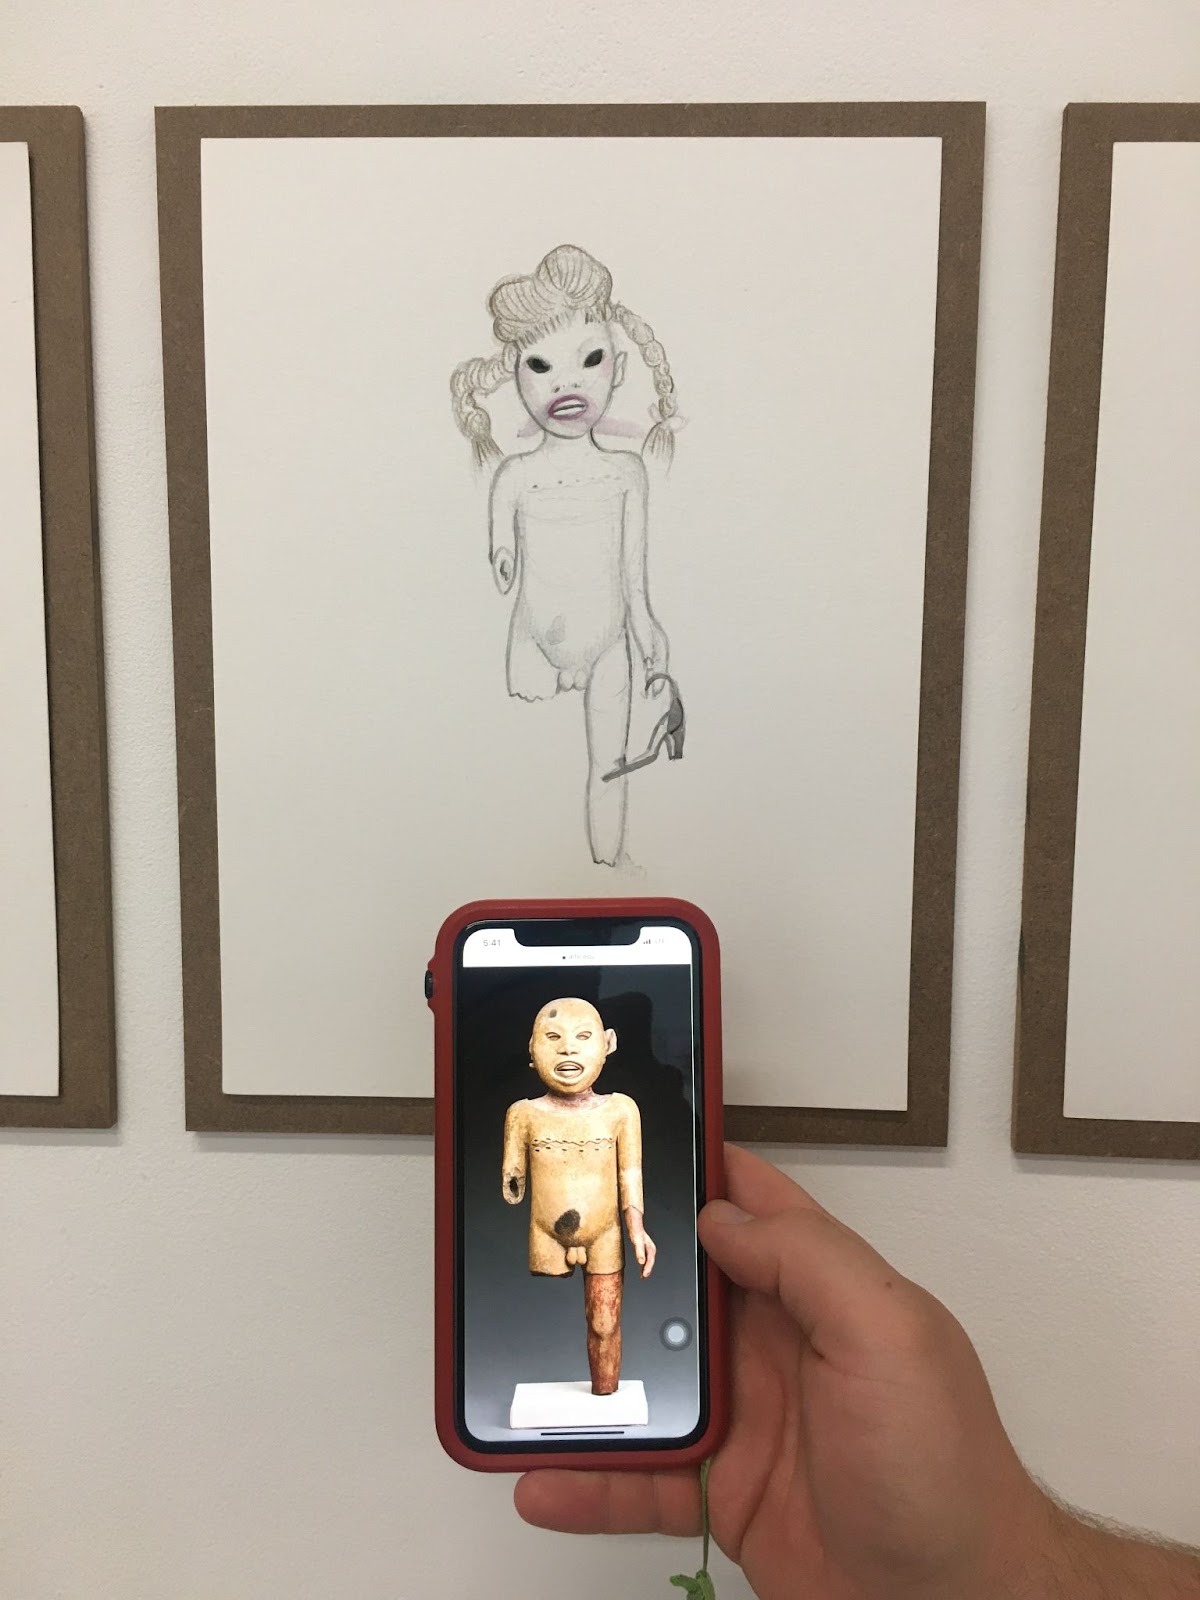 Image: A close up shot of a figure drawing by Sofia Moreno. The figure has a broken leg and is carrying a heeled shoe. In front of the drawing extends a hand holding a phone, which shows an image from the internet of an ancient figurative sculpture to draw comparison. Photo by Noa/h Fields.